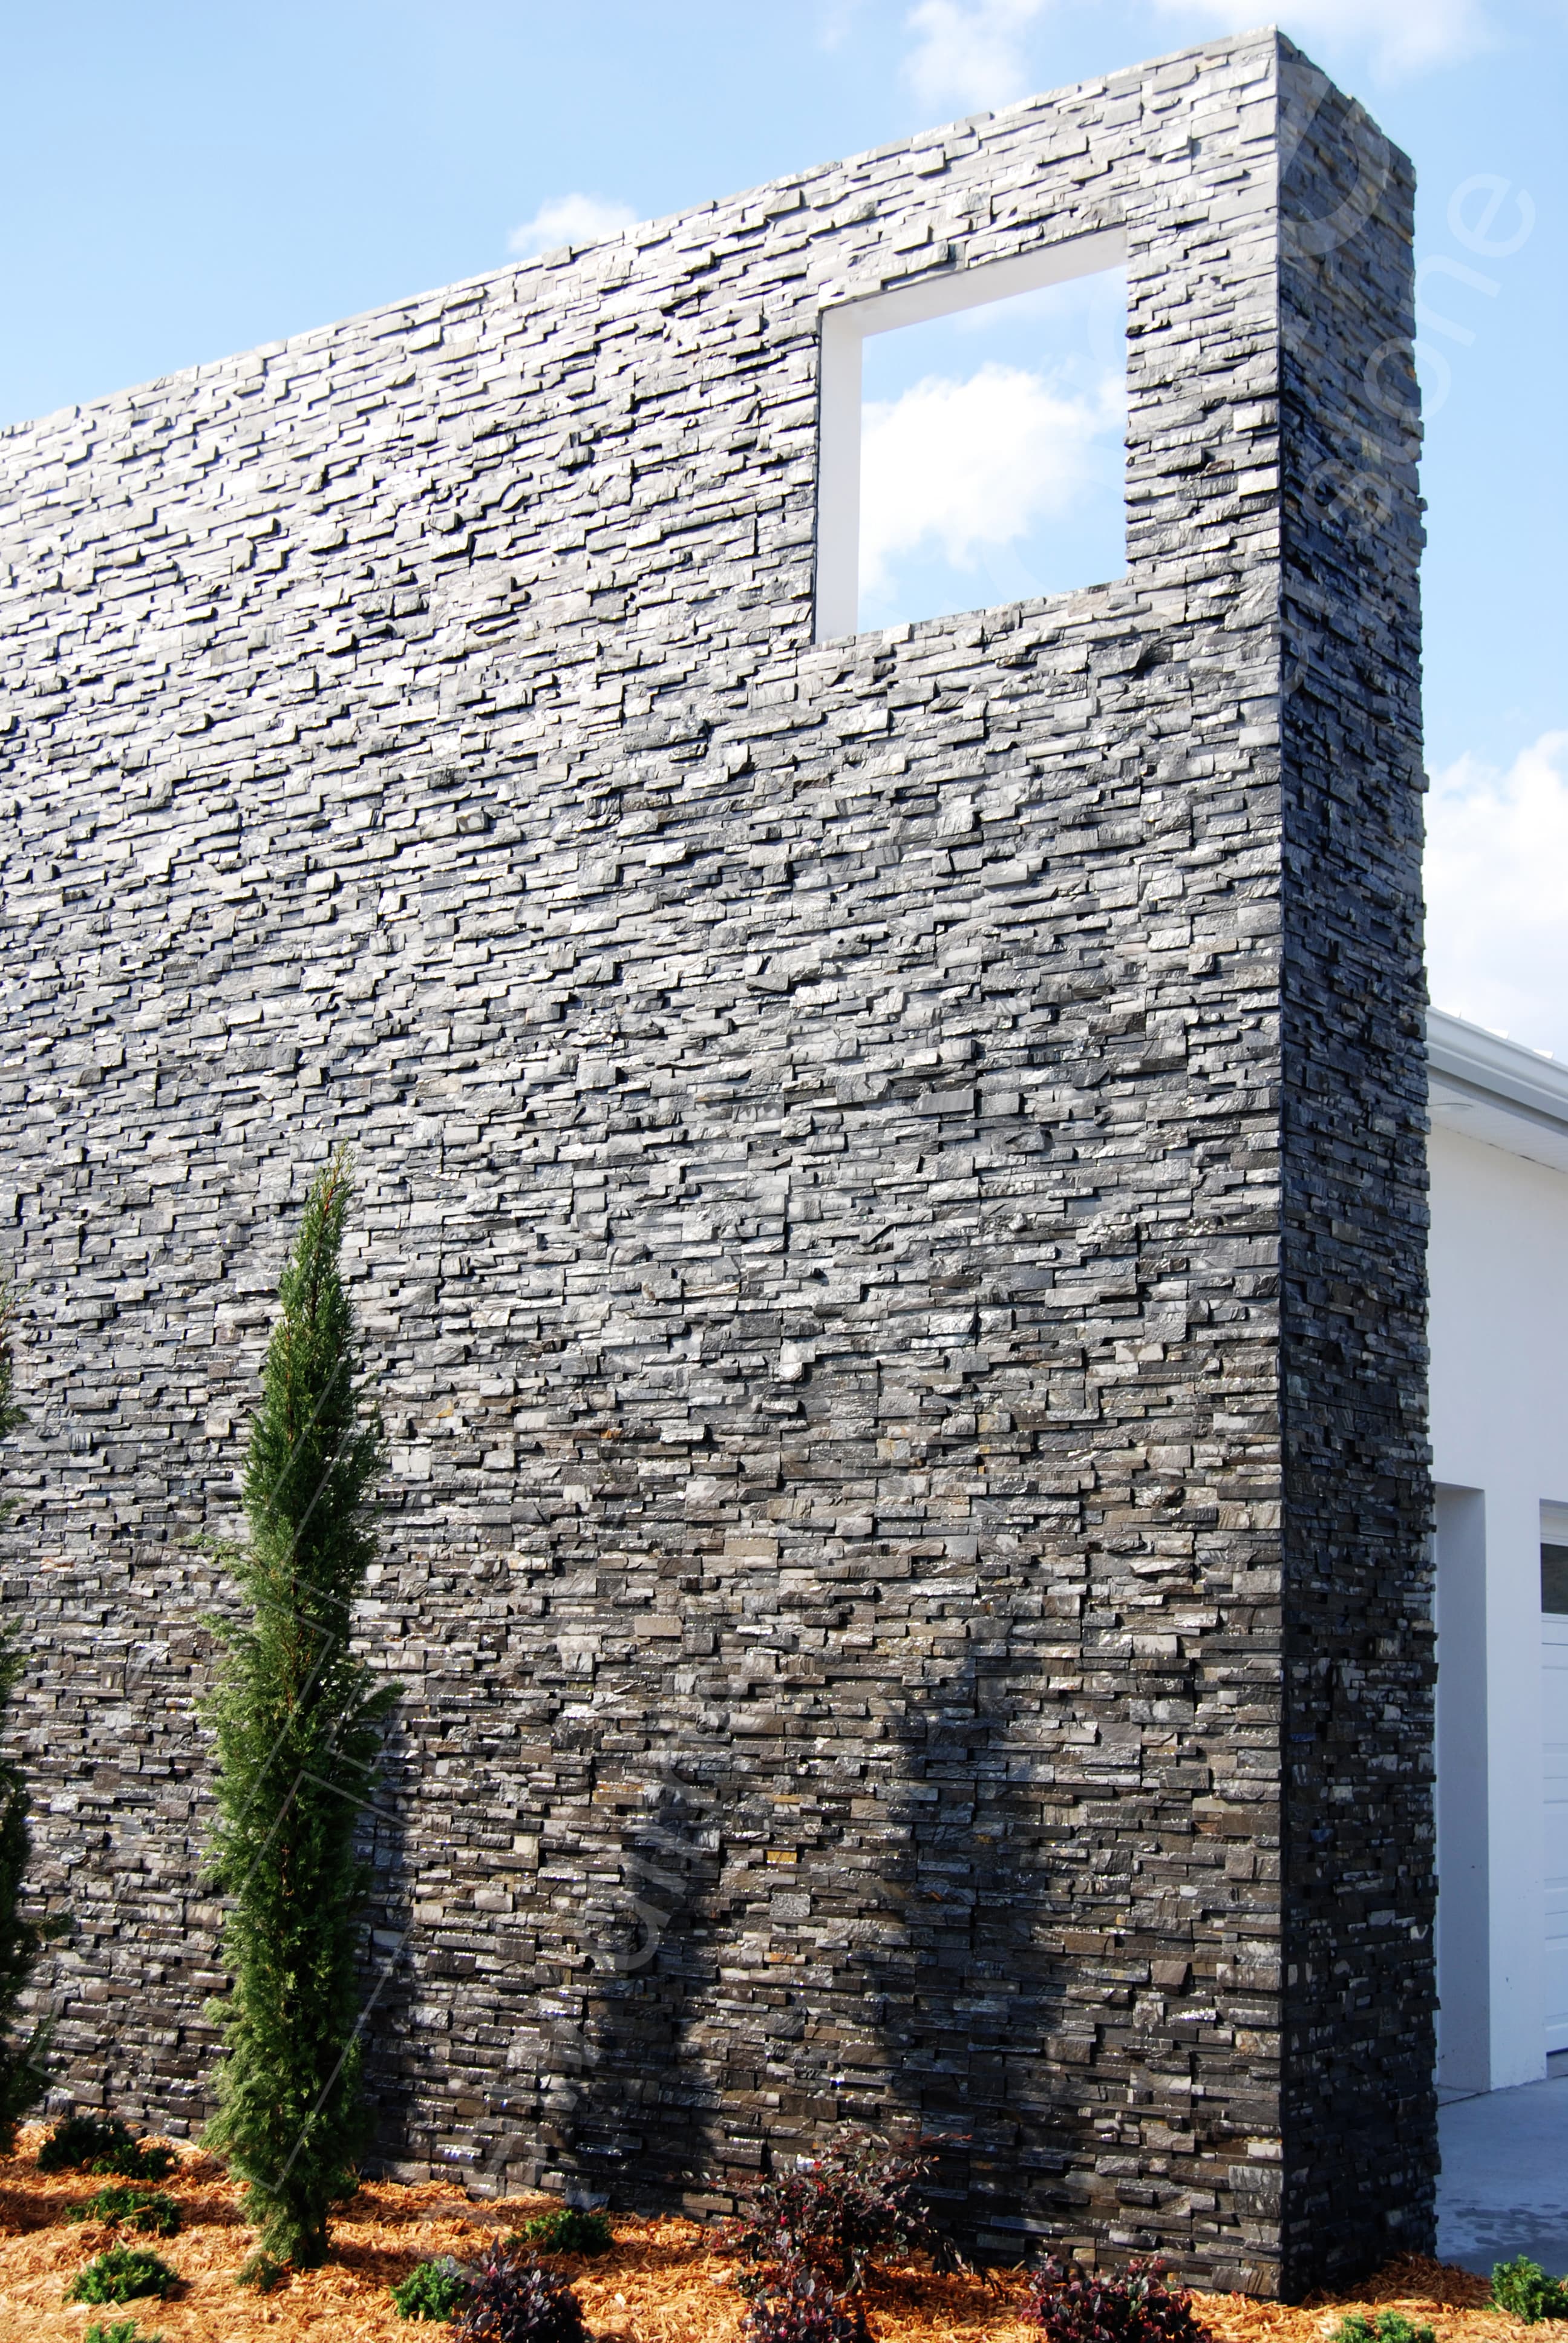 Norstone Charcoal Standard thine stone veneer panels on an exterior feature wall project in Florida